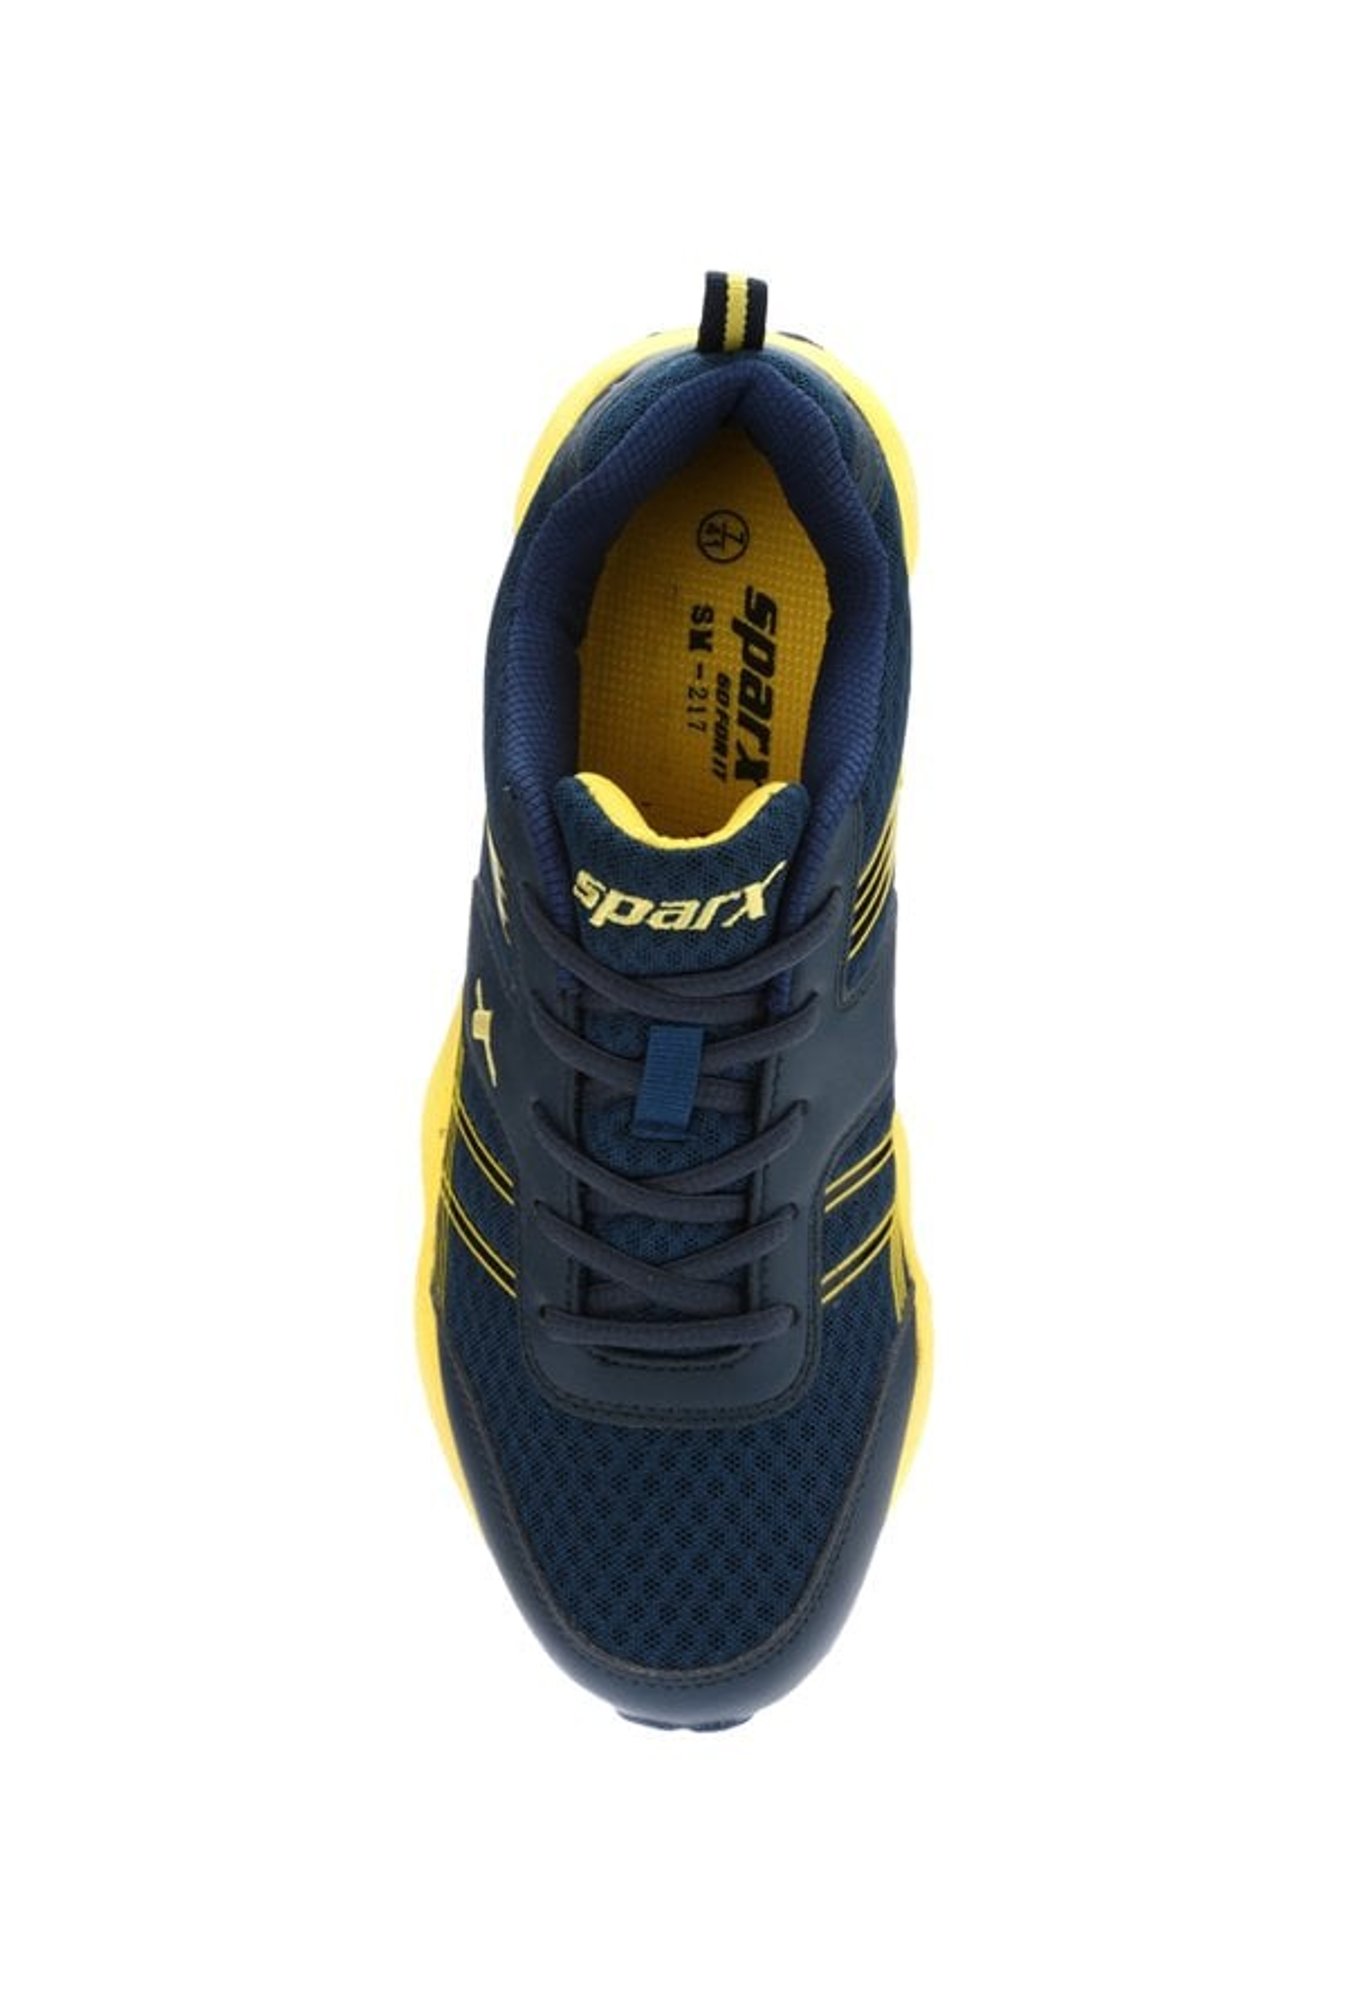 sparx shoes new model 217